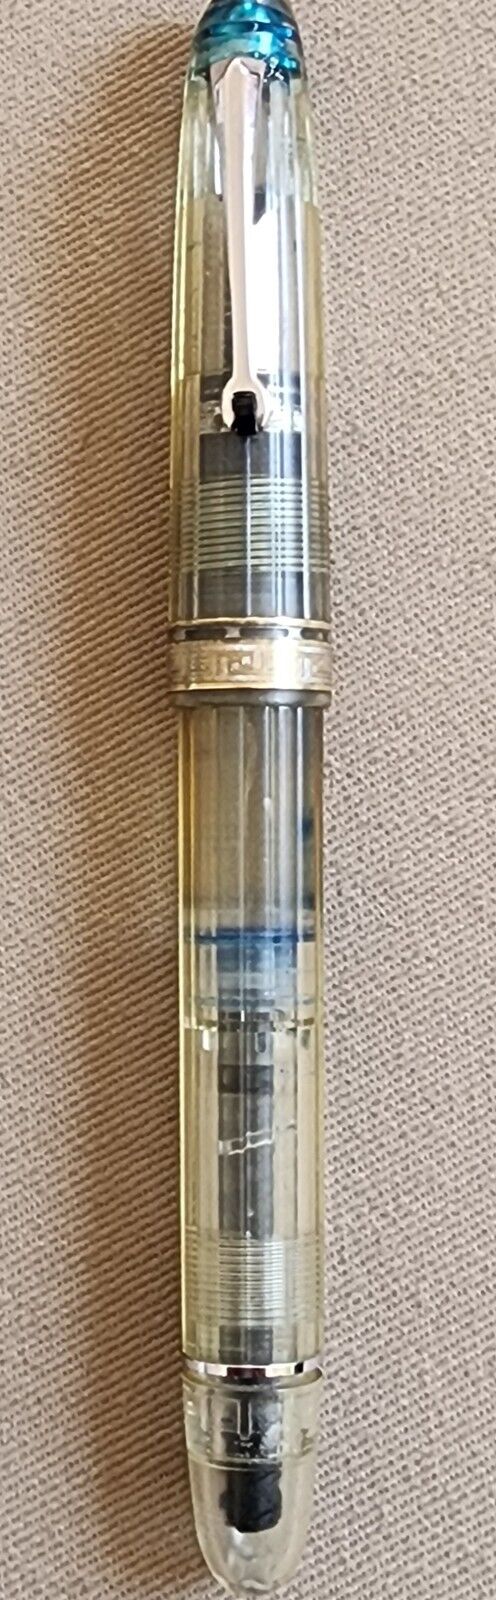 Omas Ogiva Fountain Pen Clear Demonstrator with Gold Trim - 18ct Nib